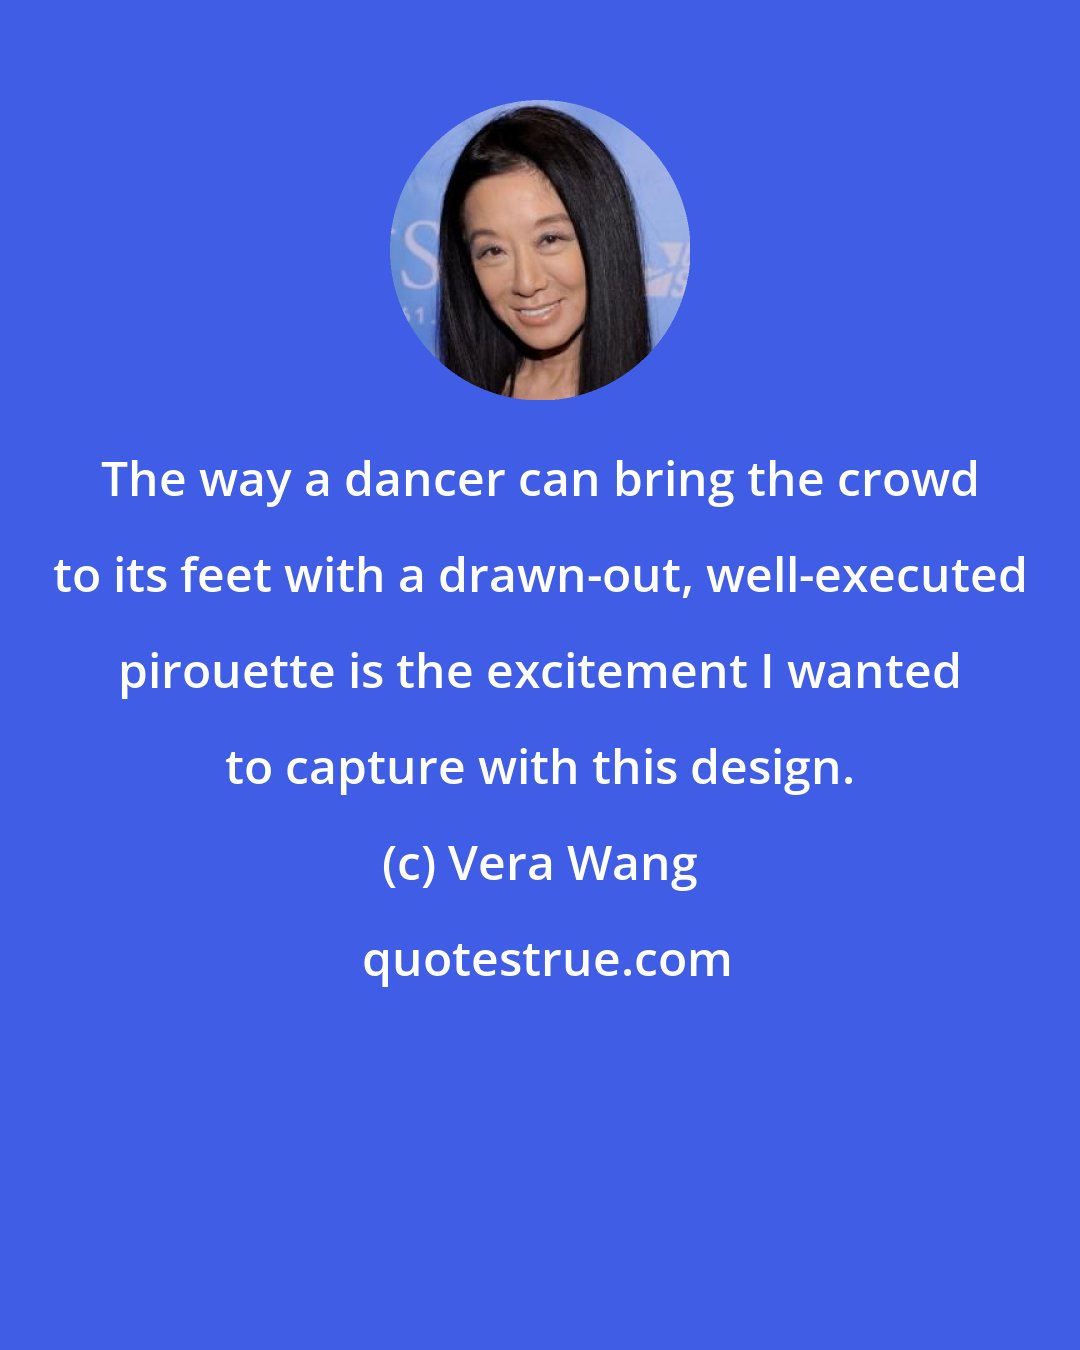 Vera Wang: The way a dancer can bring the crowd to its feet with a drawn-out, well-executed pirouette is the excitement I wanted to capture with this design.